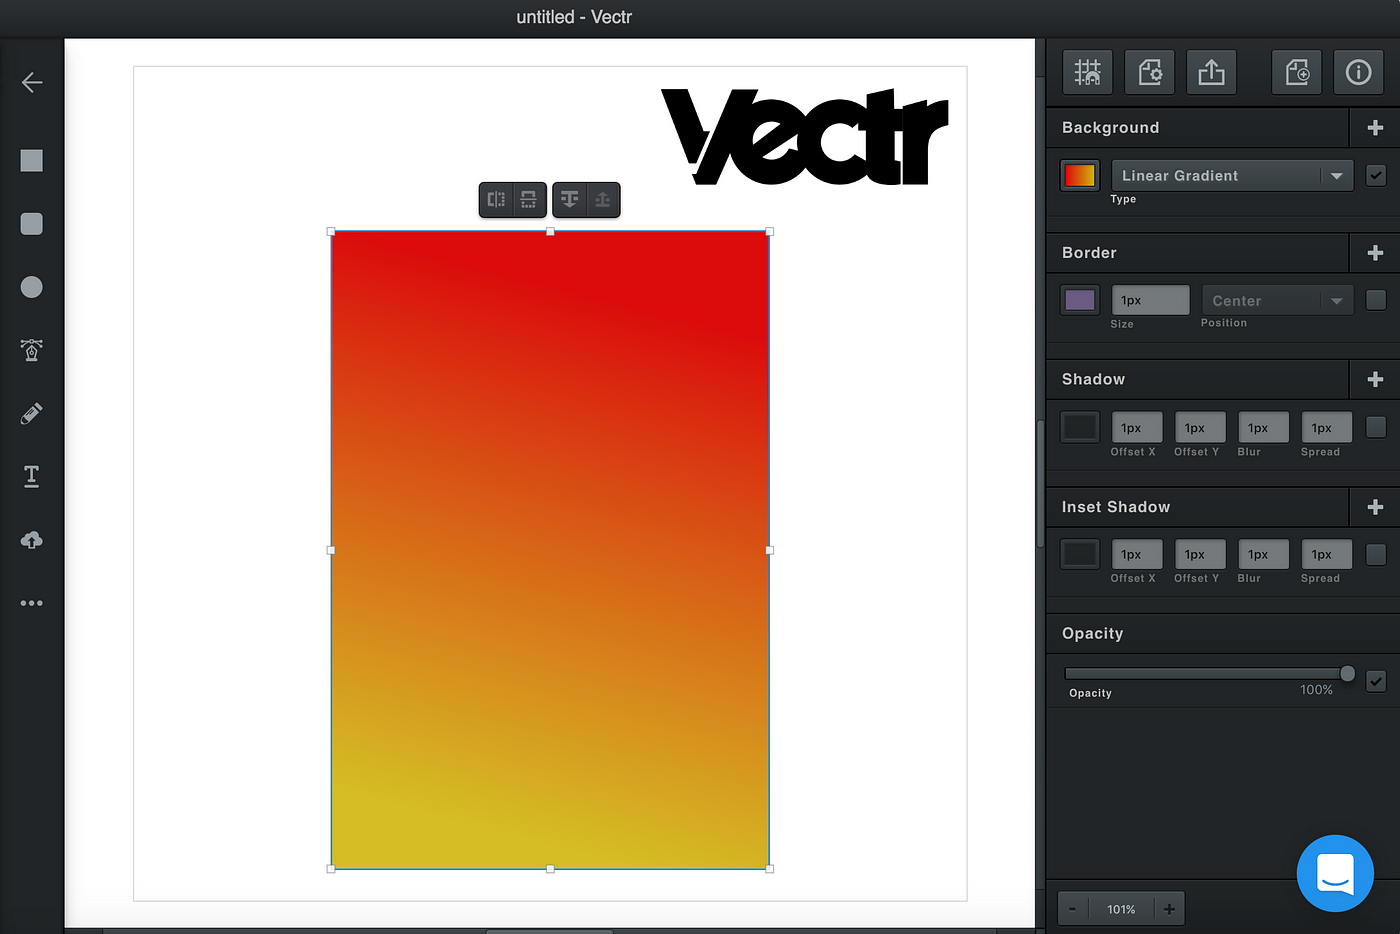 How To Use Powerful Image Editing In Vectr | by Vectr | Vectr | Medium